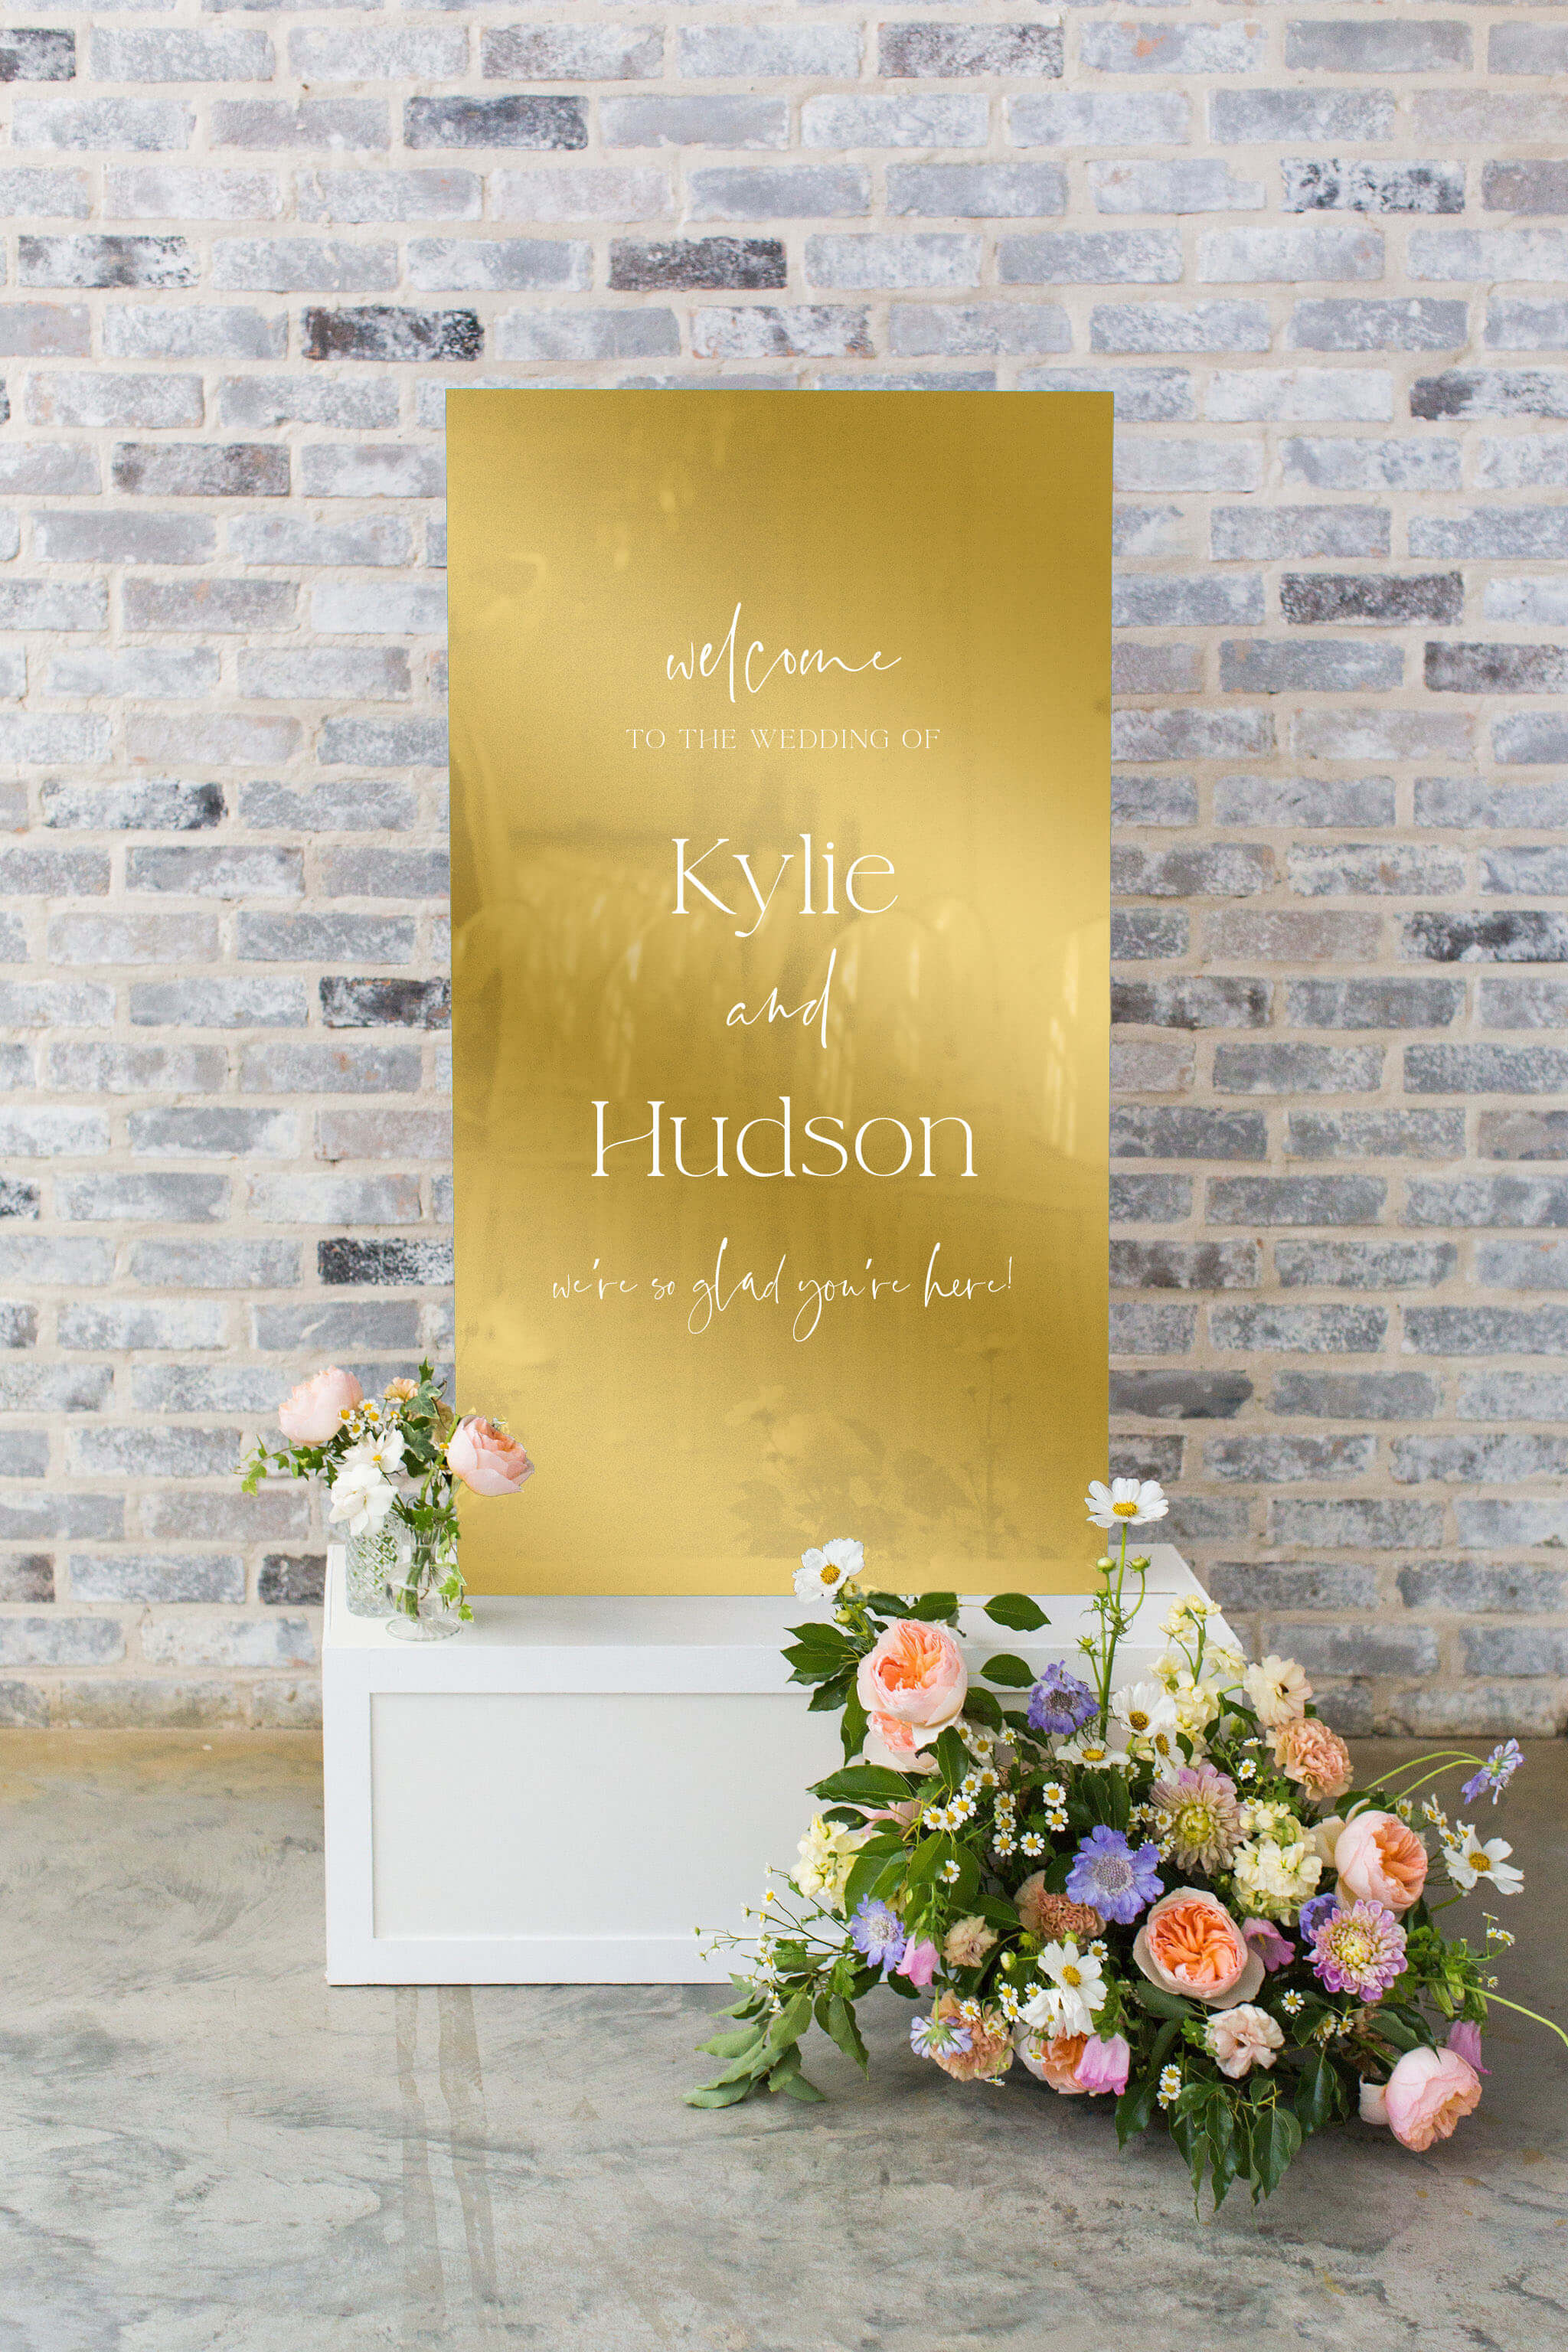 Large Mirror Welcome Wedding Sign Lily Roe Co.